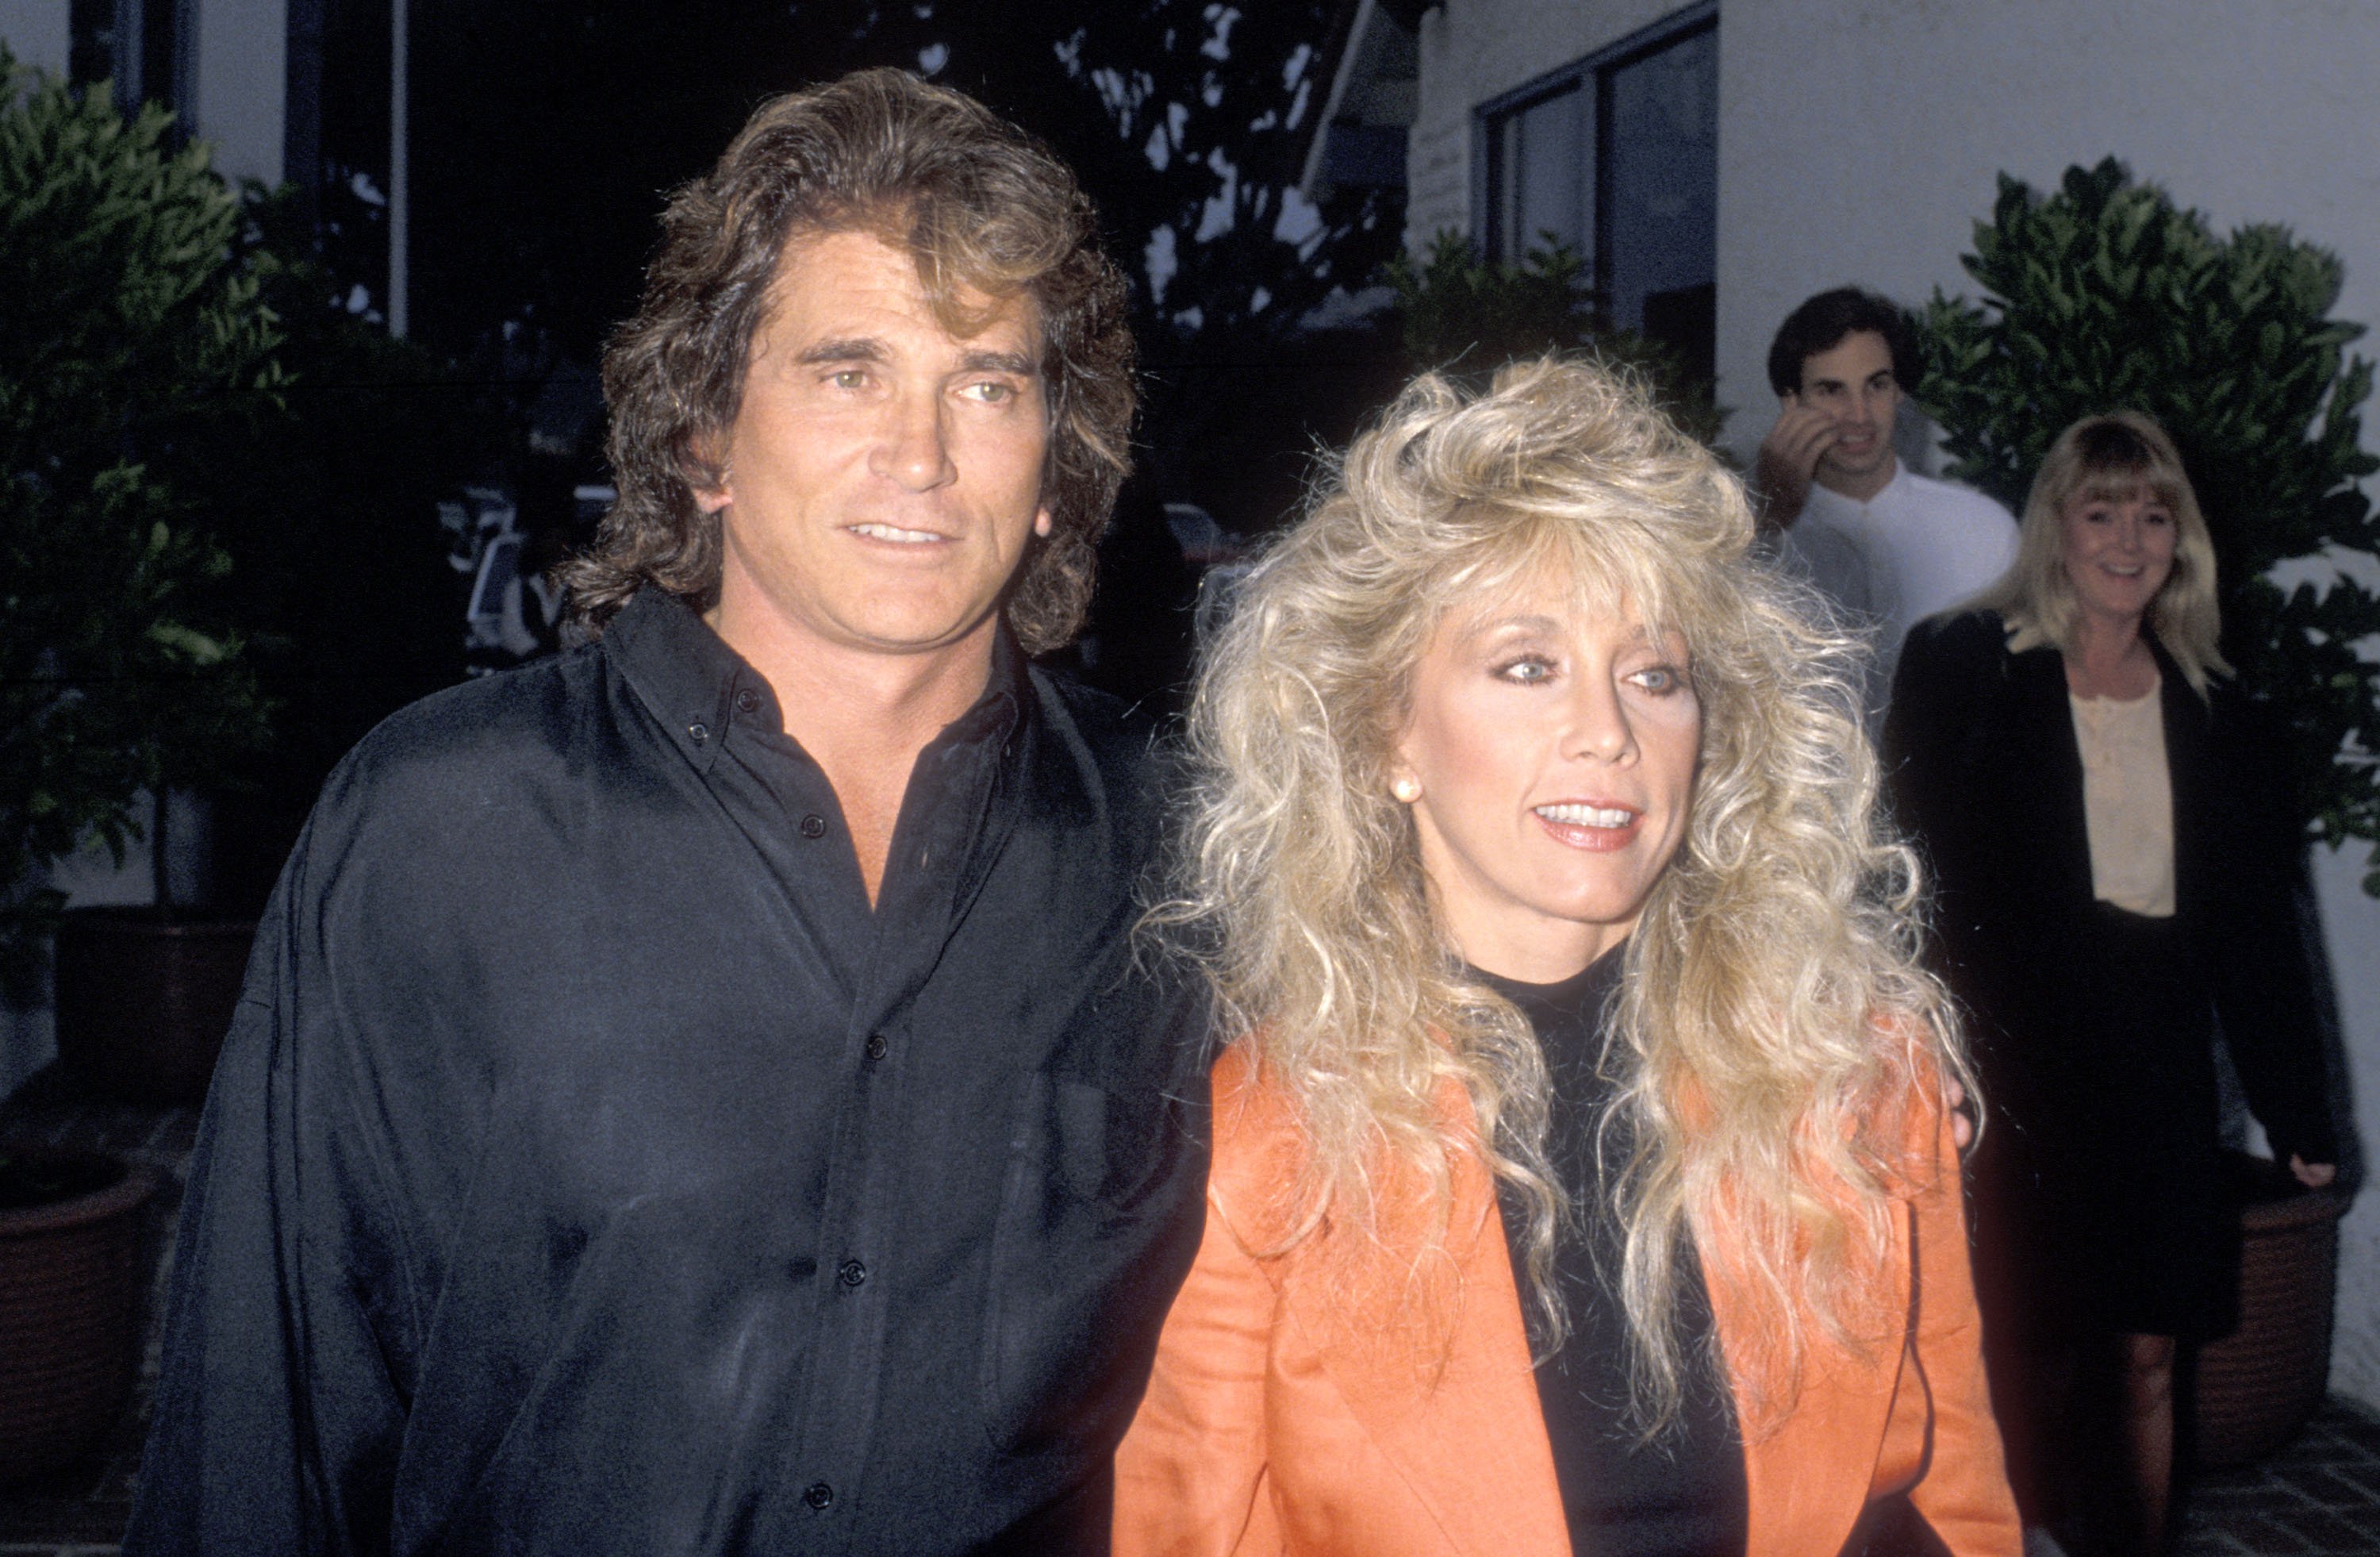 Michael Landon wears a black button down shirt and Cindy Landon wears an orange jacket as they attend a restaurant opening. 